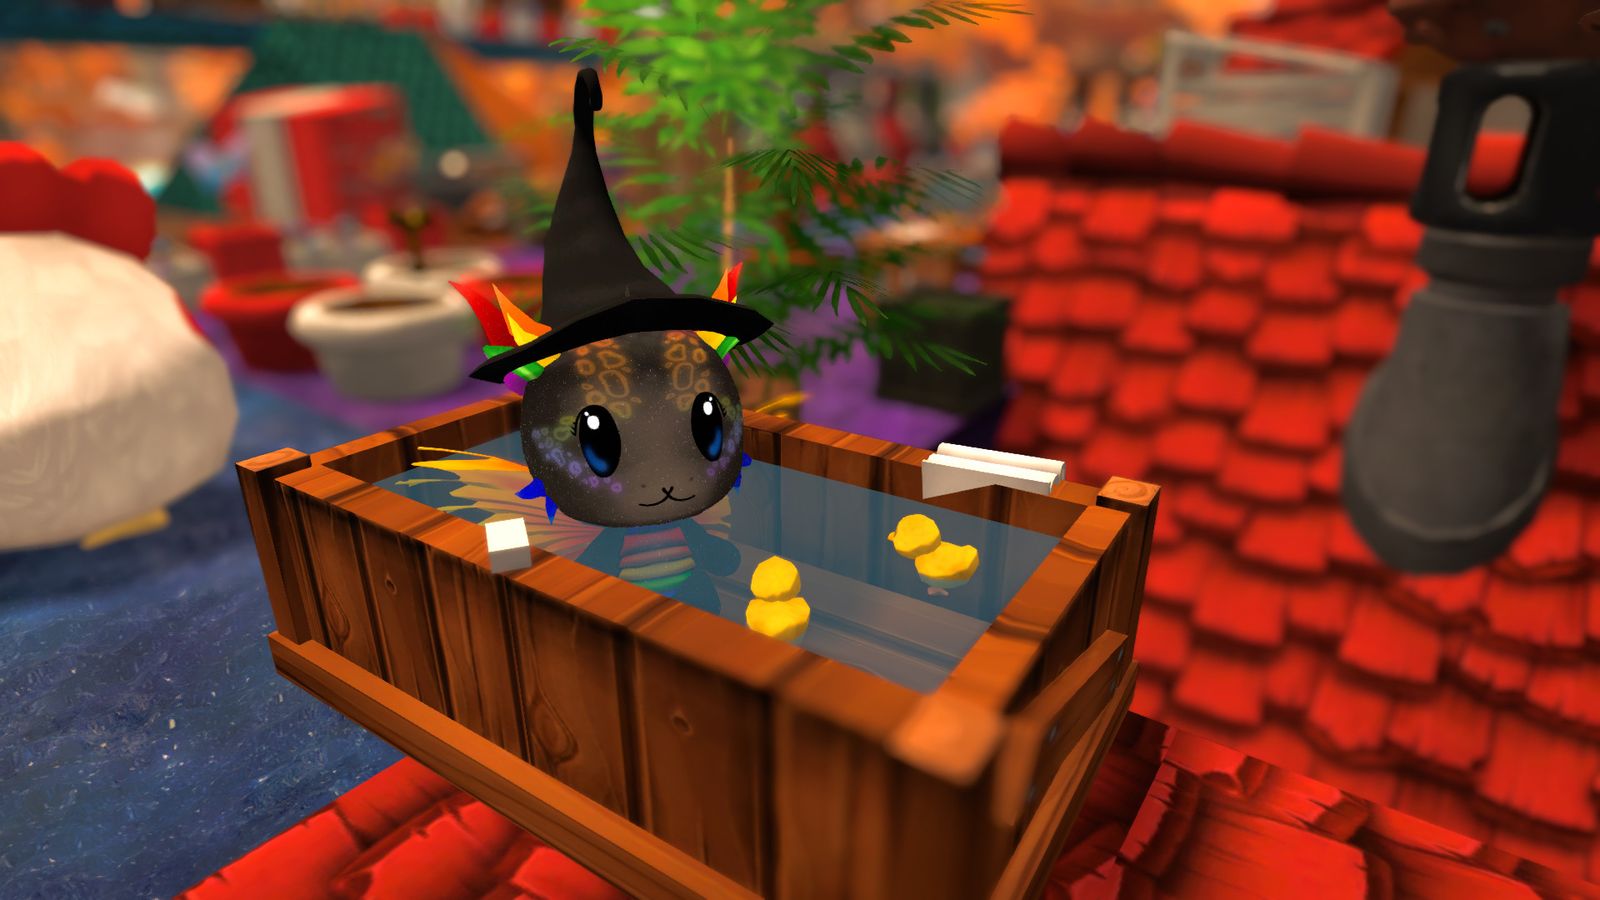 In-game image from Garden Paws of a semi translucent character wearing a black witch hat laying in a wooden bath.